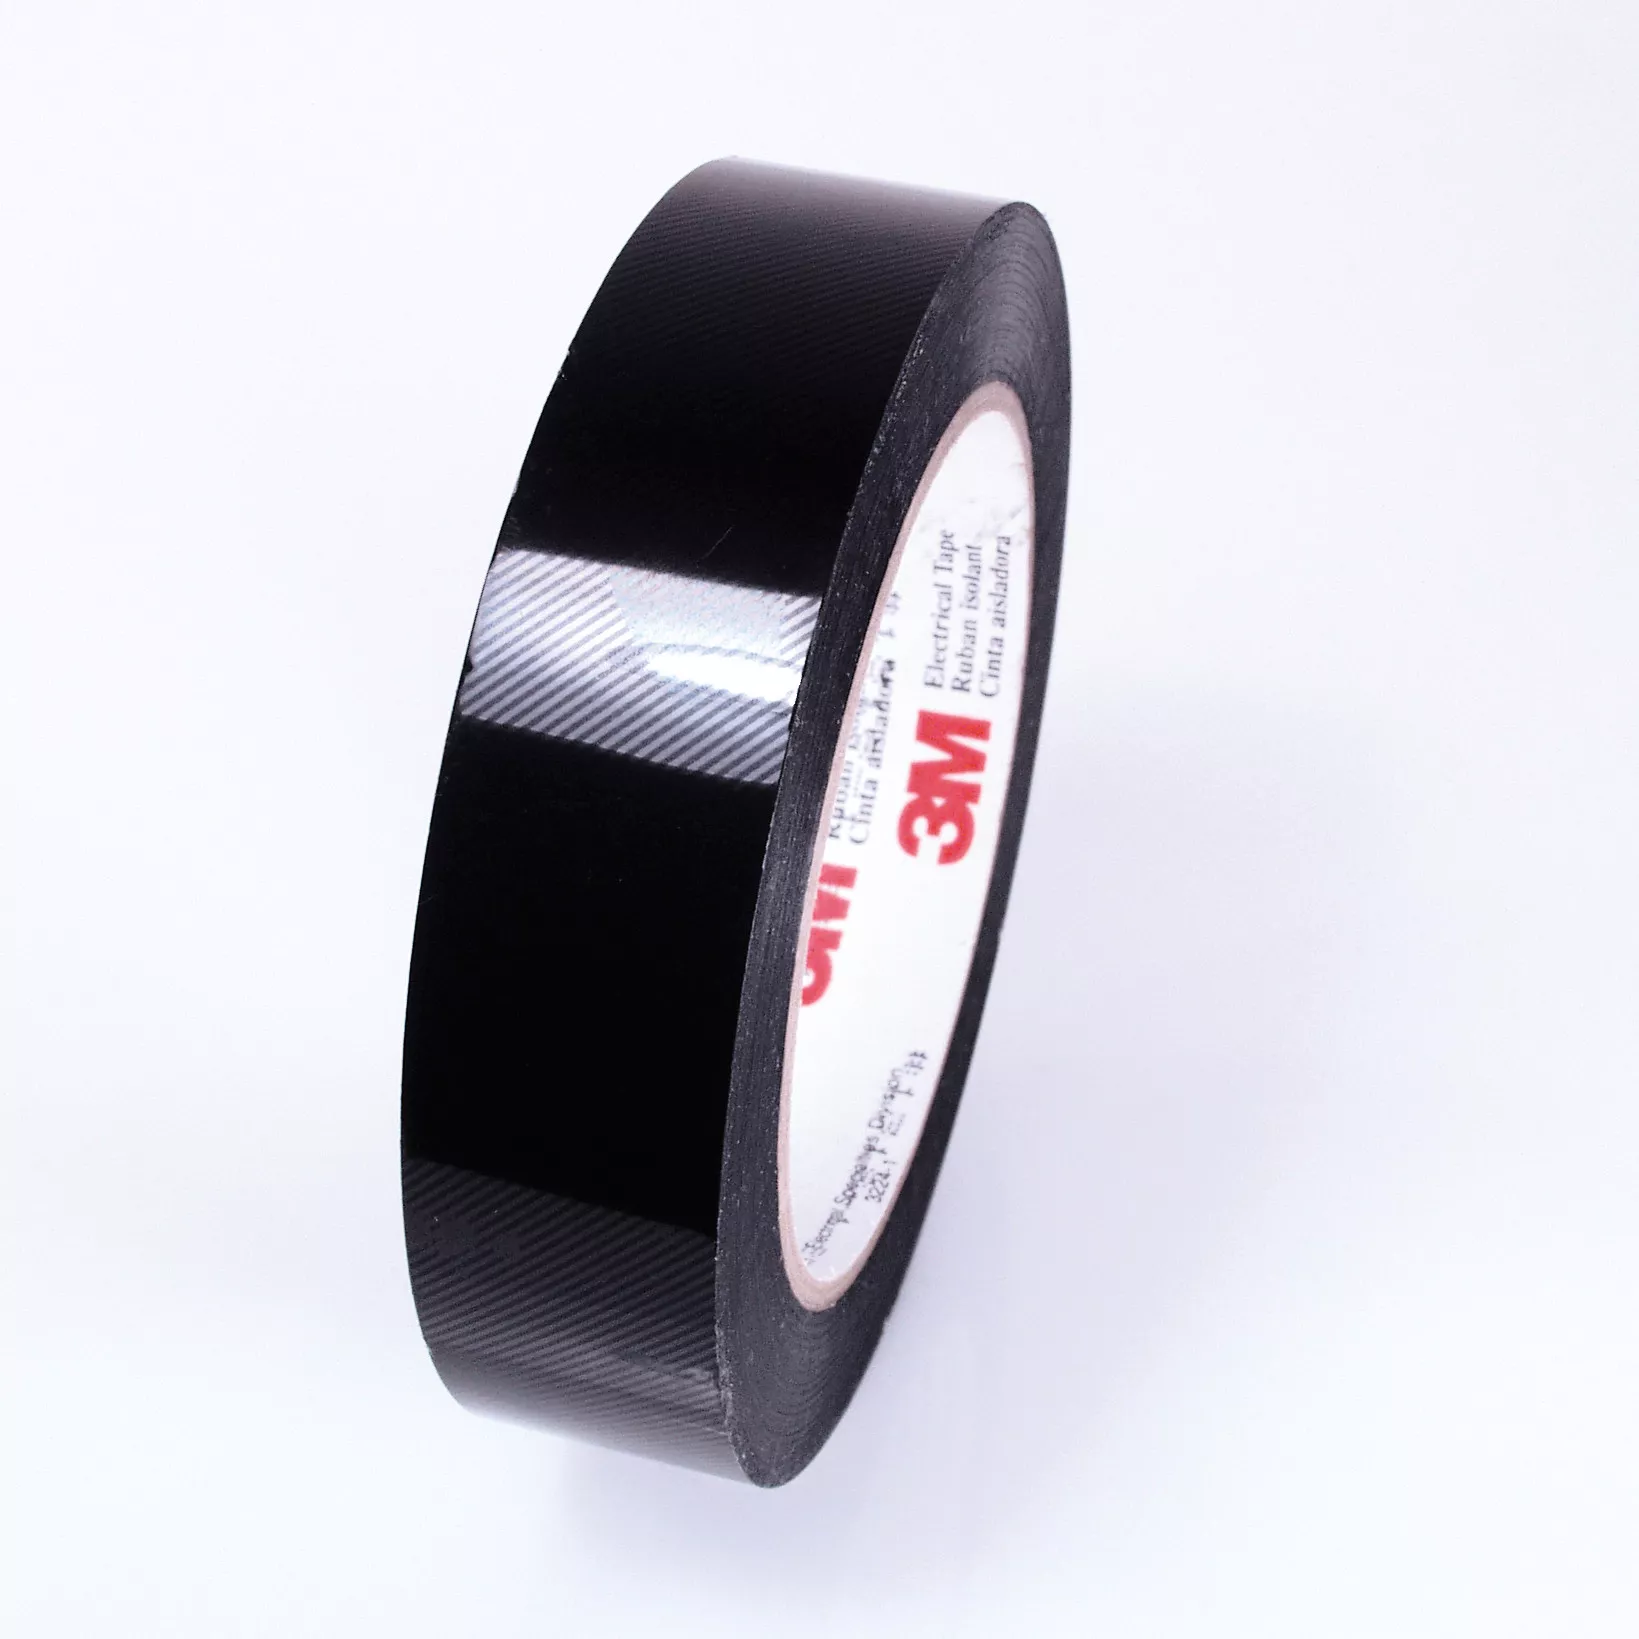 3M™ Polyester Film Electrical Tape 1350F-1, 24 in 72 yd Log, 3-in
plastic core, Log roll, Black, 1 Roll/Case